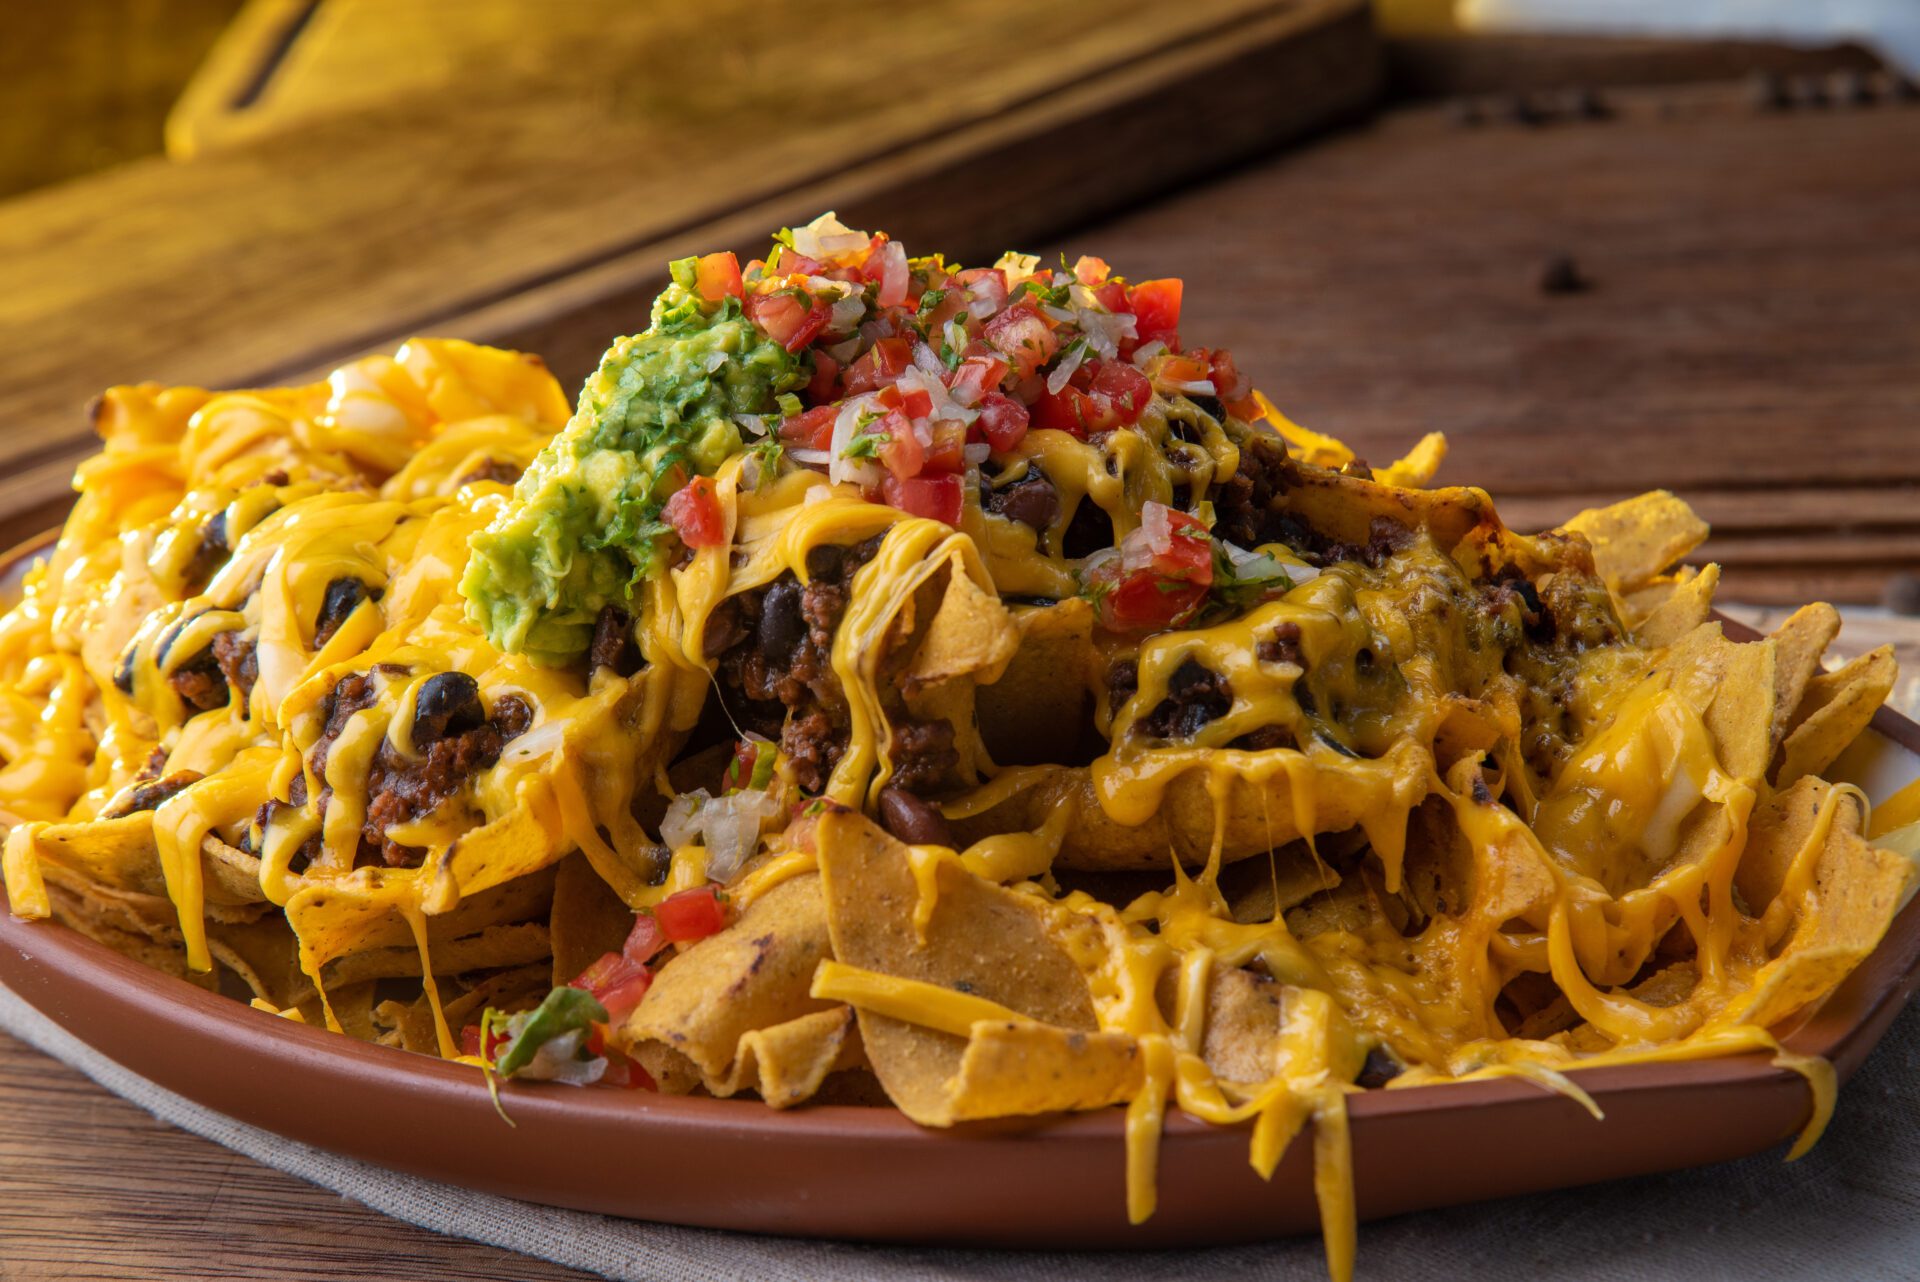 large platter of nachos with vegetables and meat